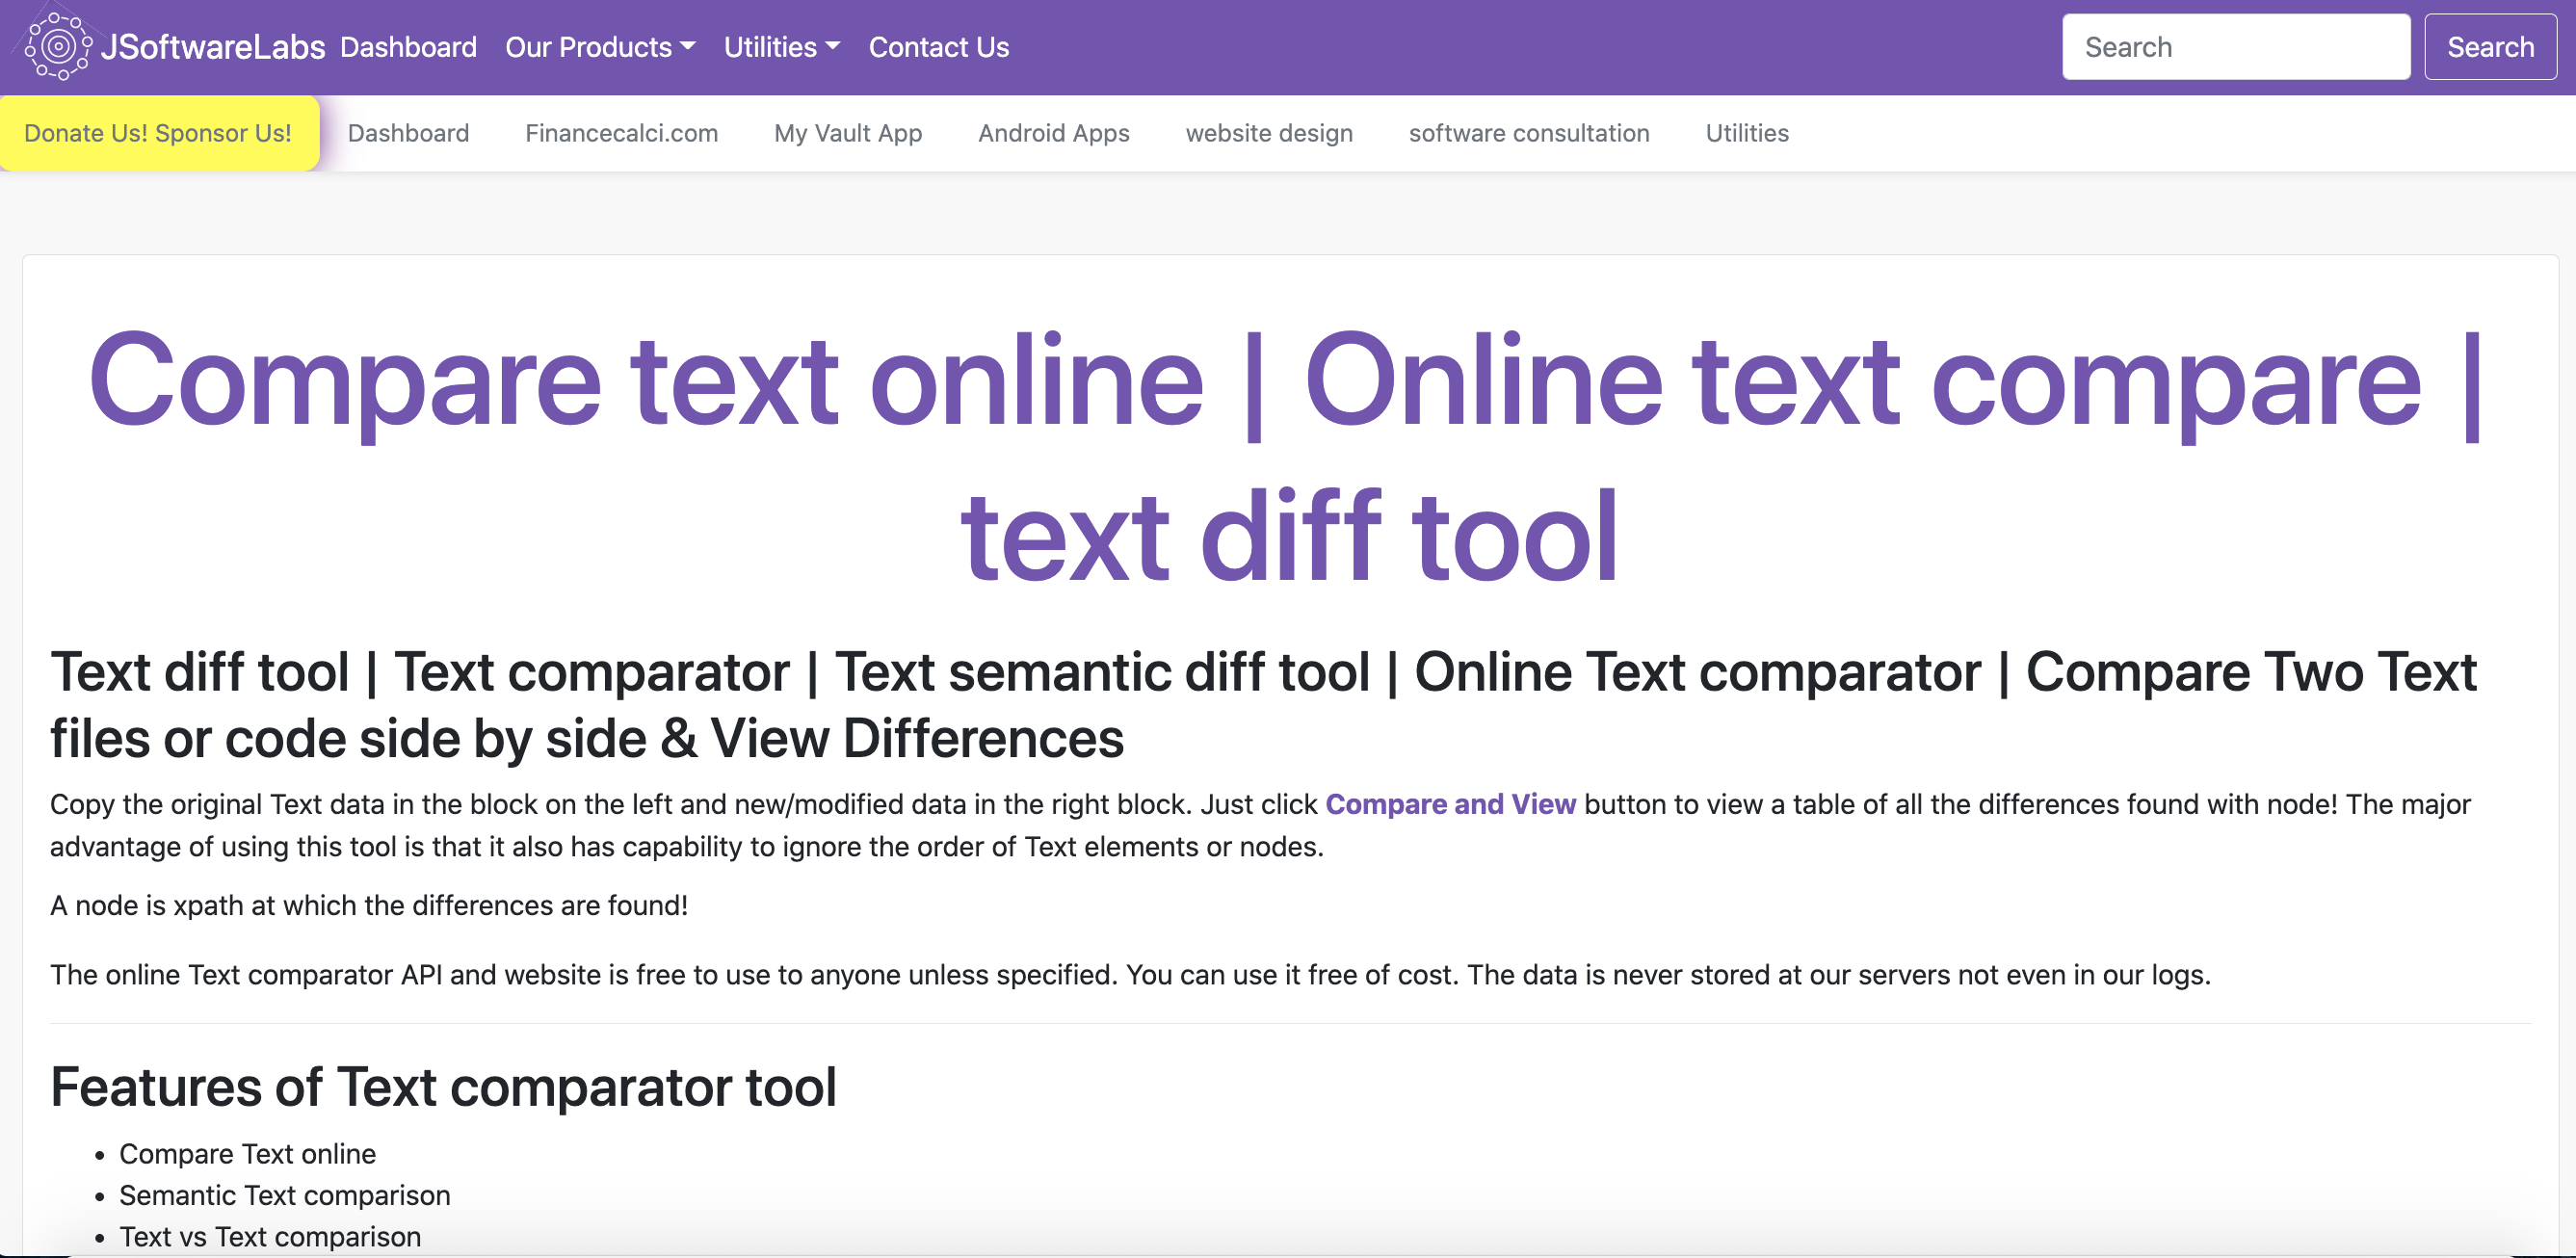 text comparator features